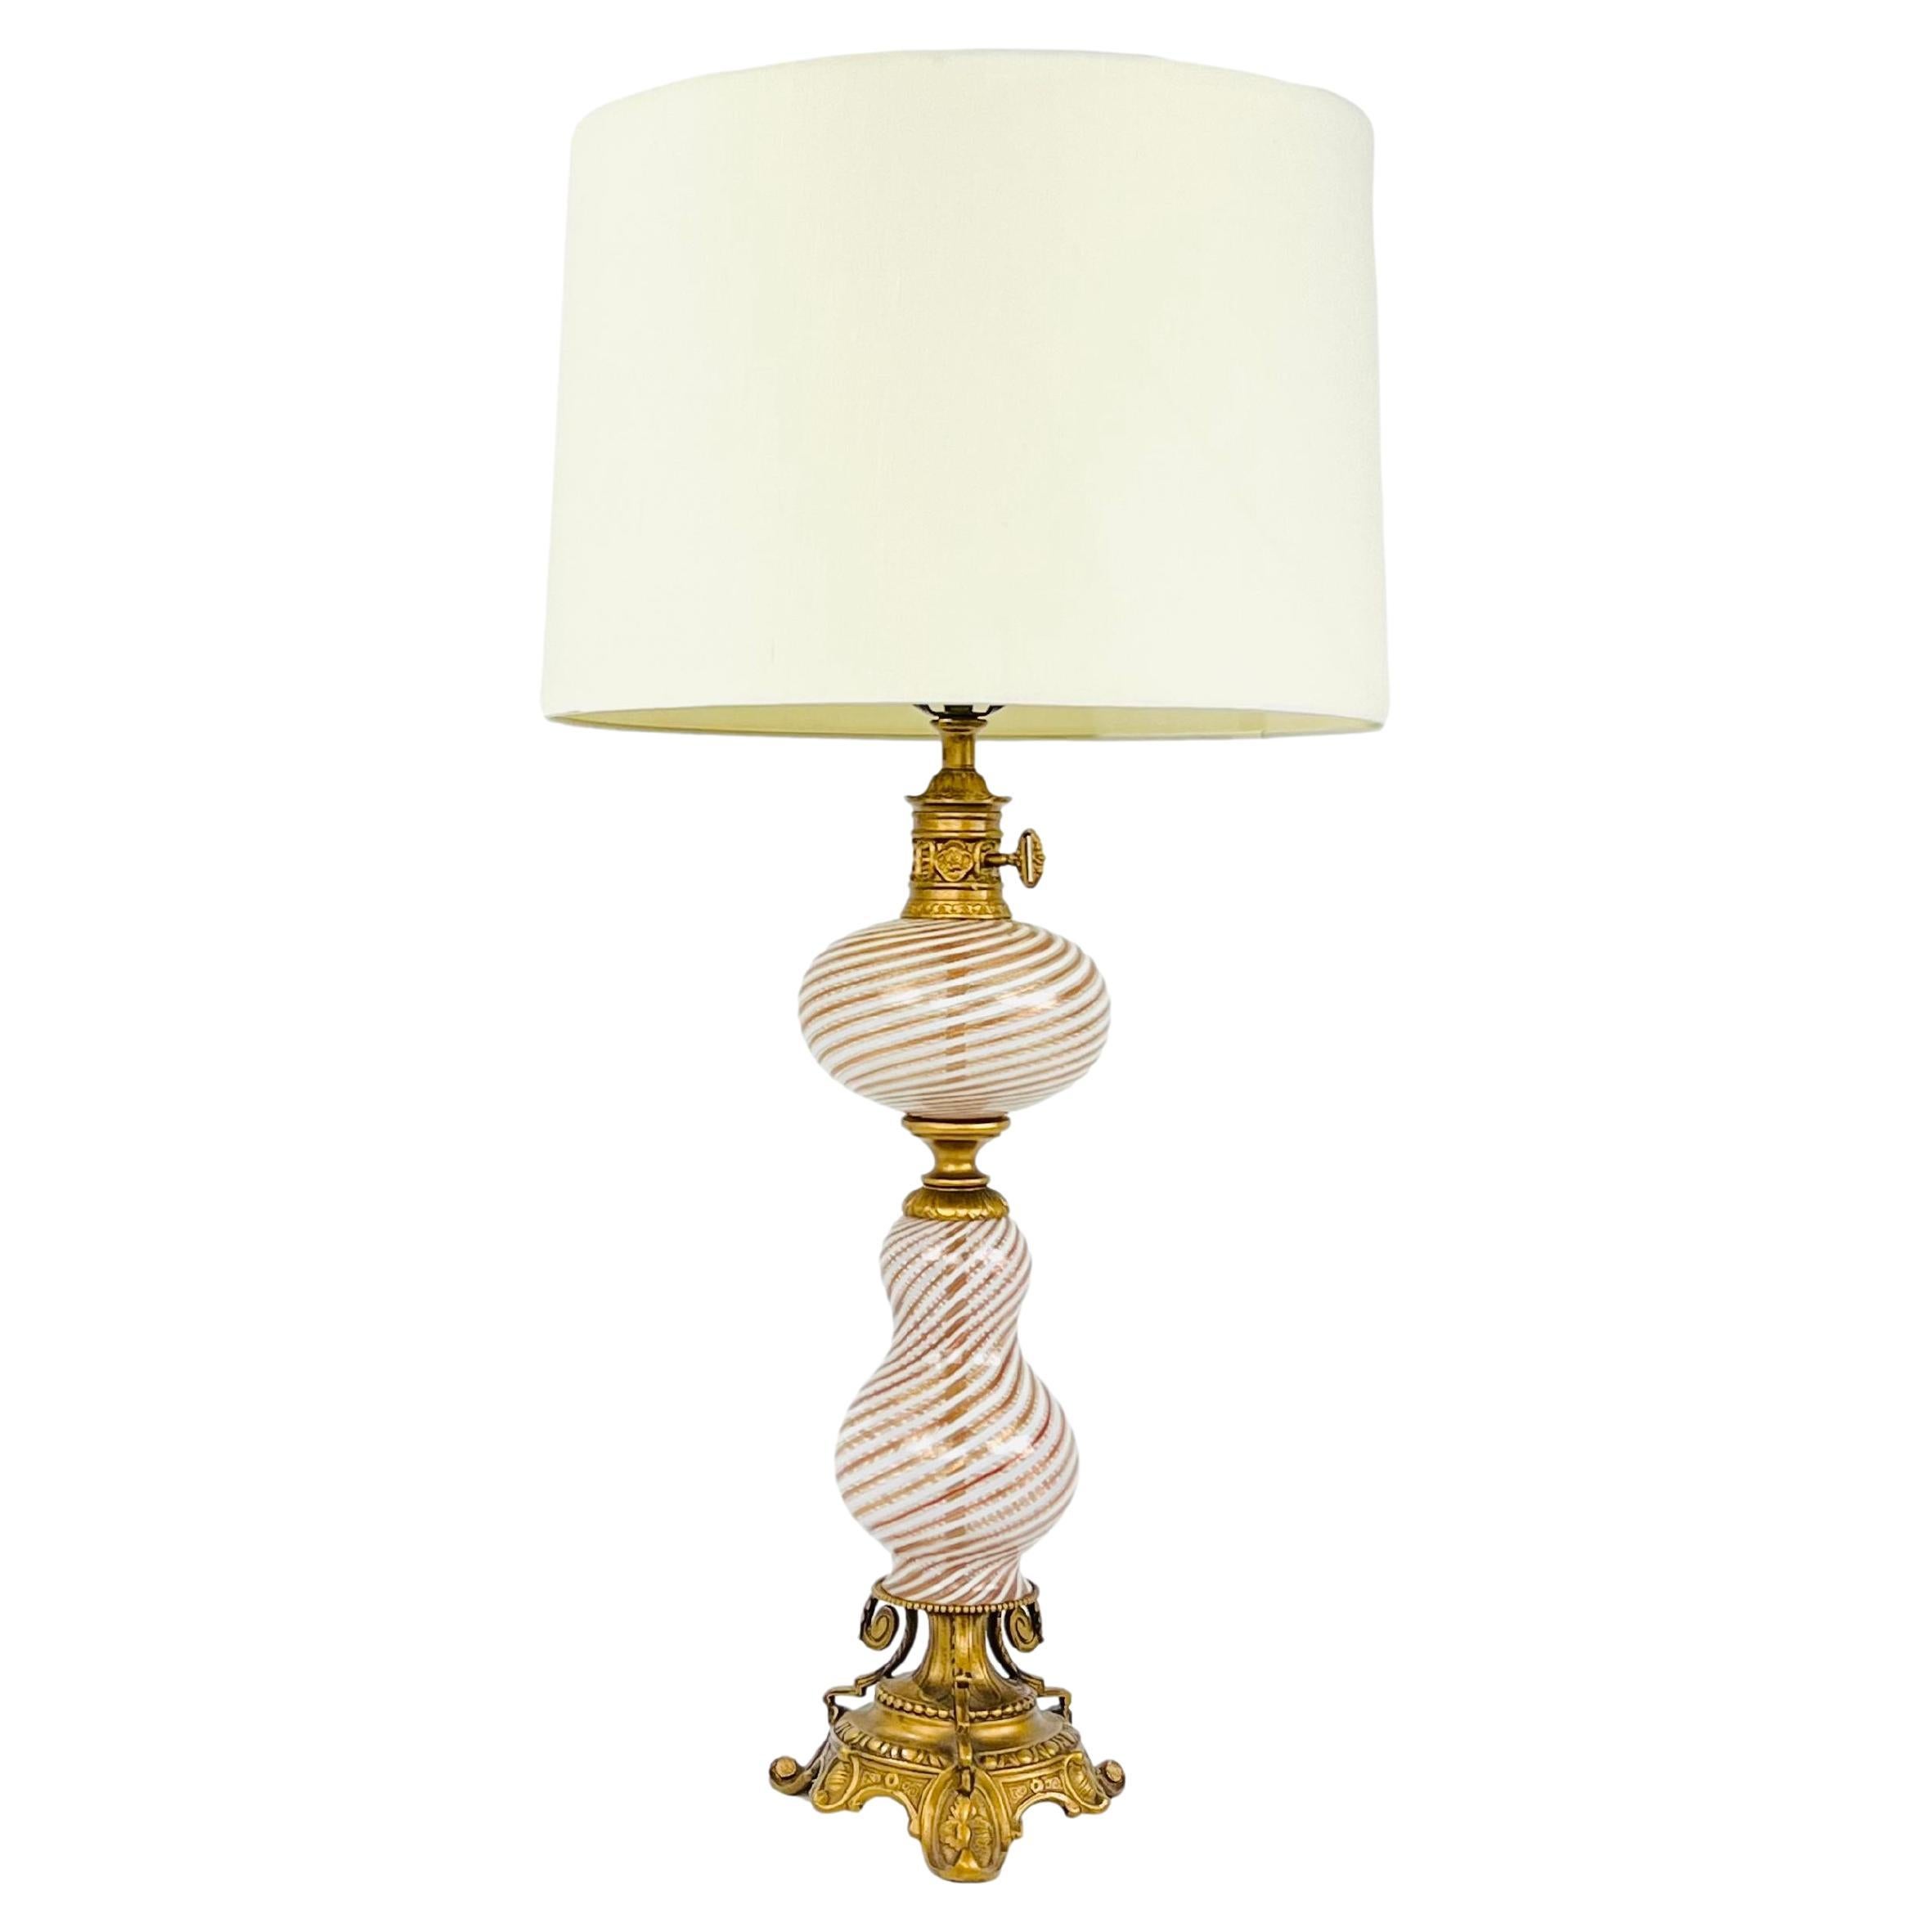 Antique Murano Glass Lamp by Dino Martens For Sale